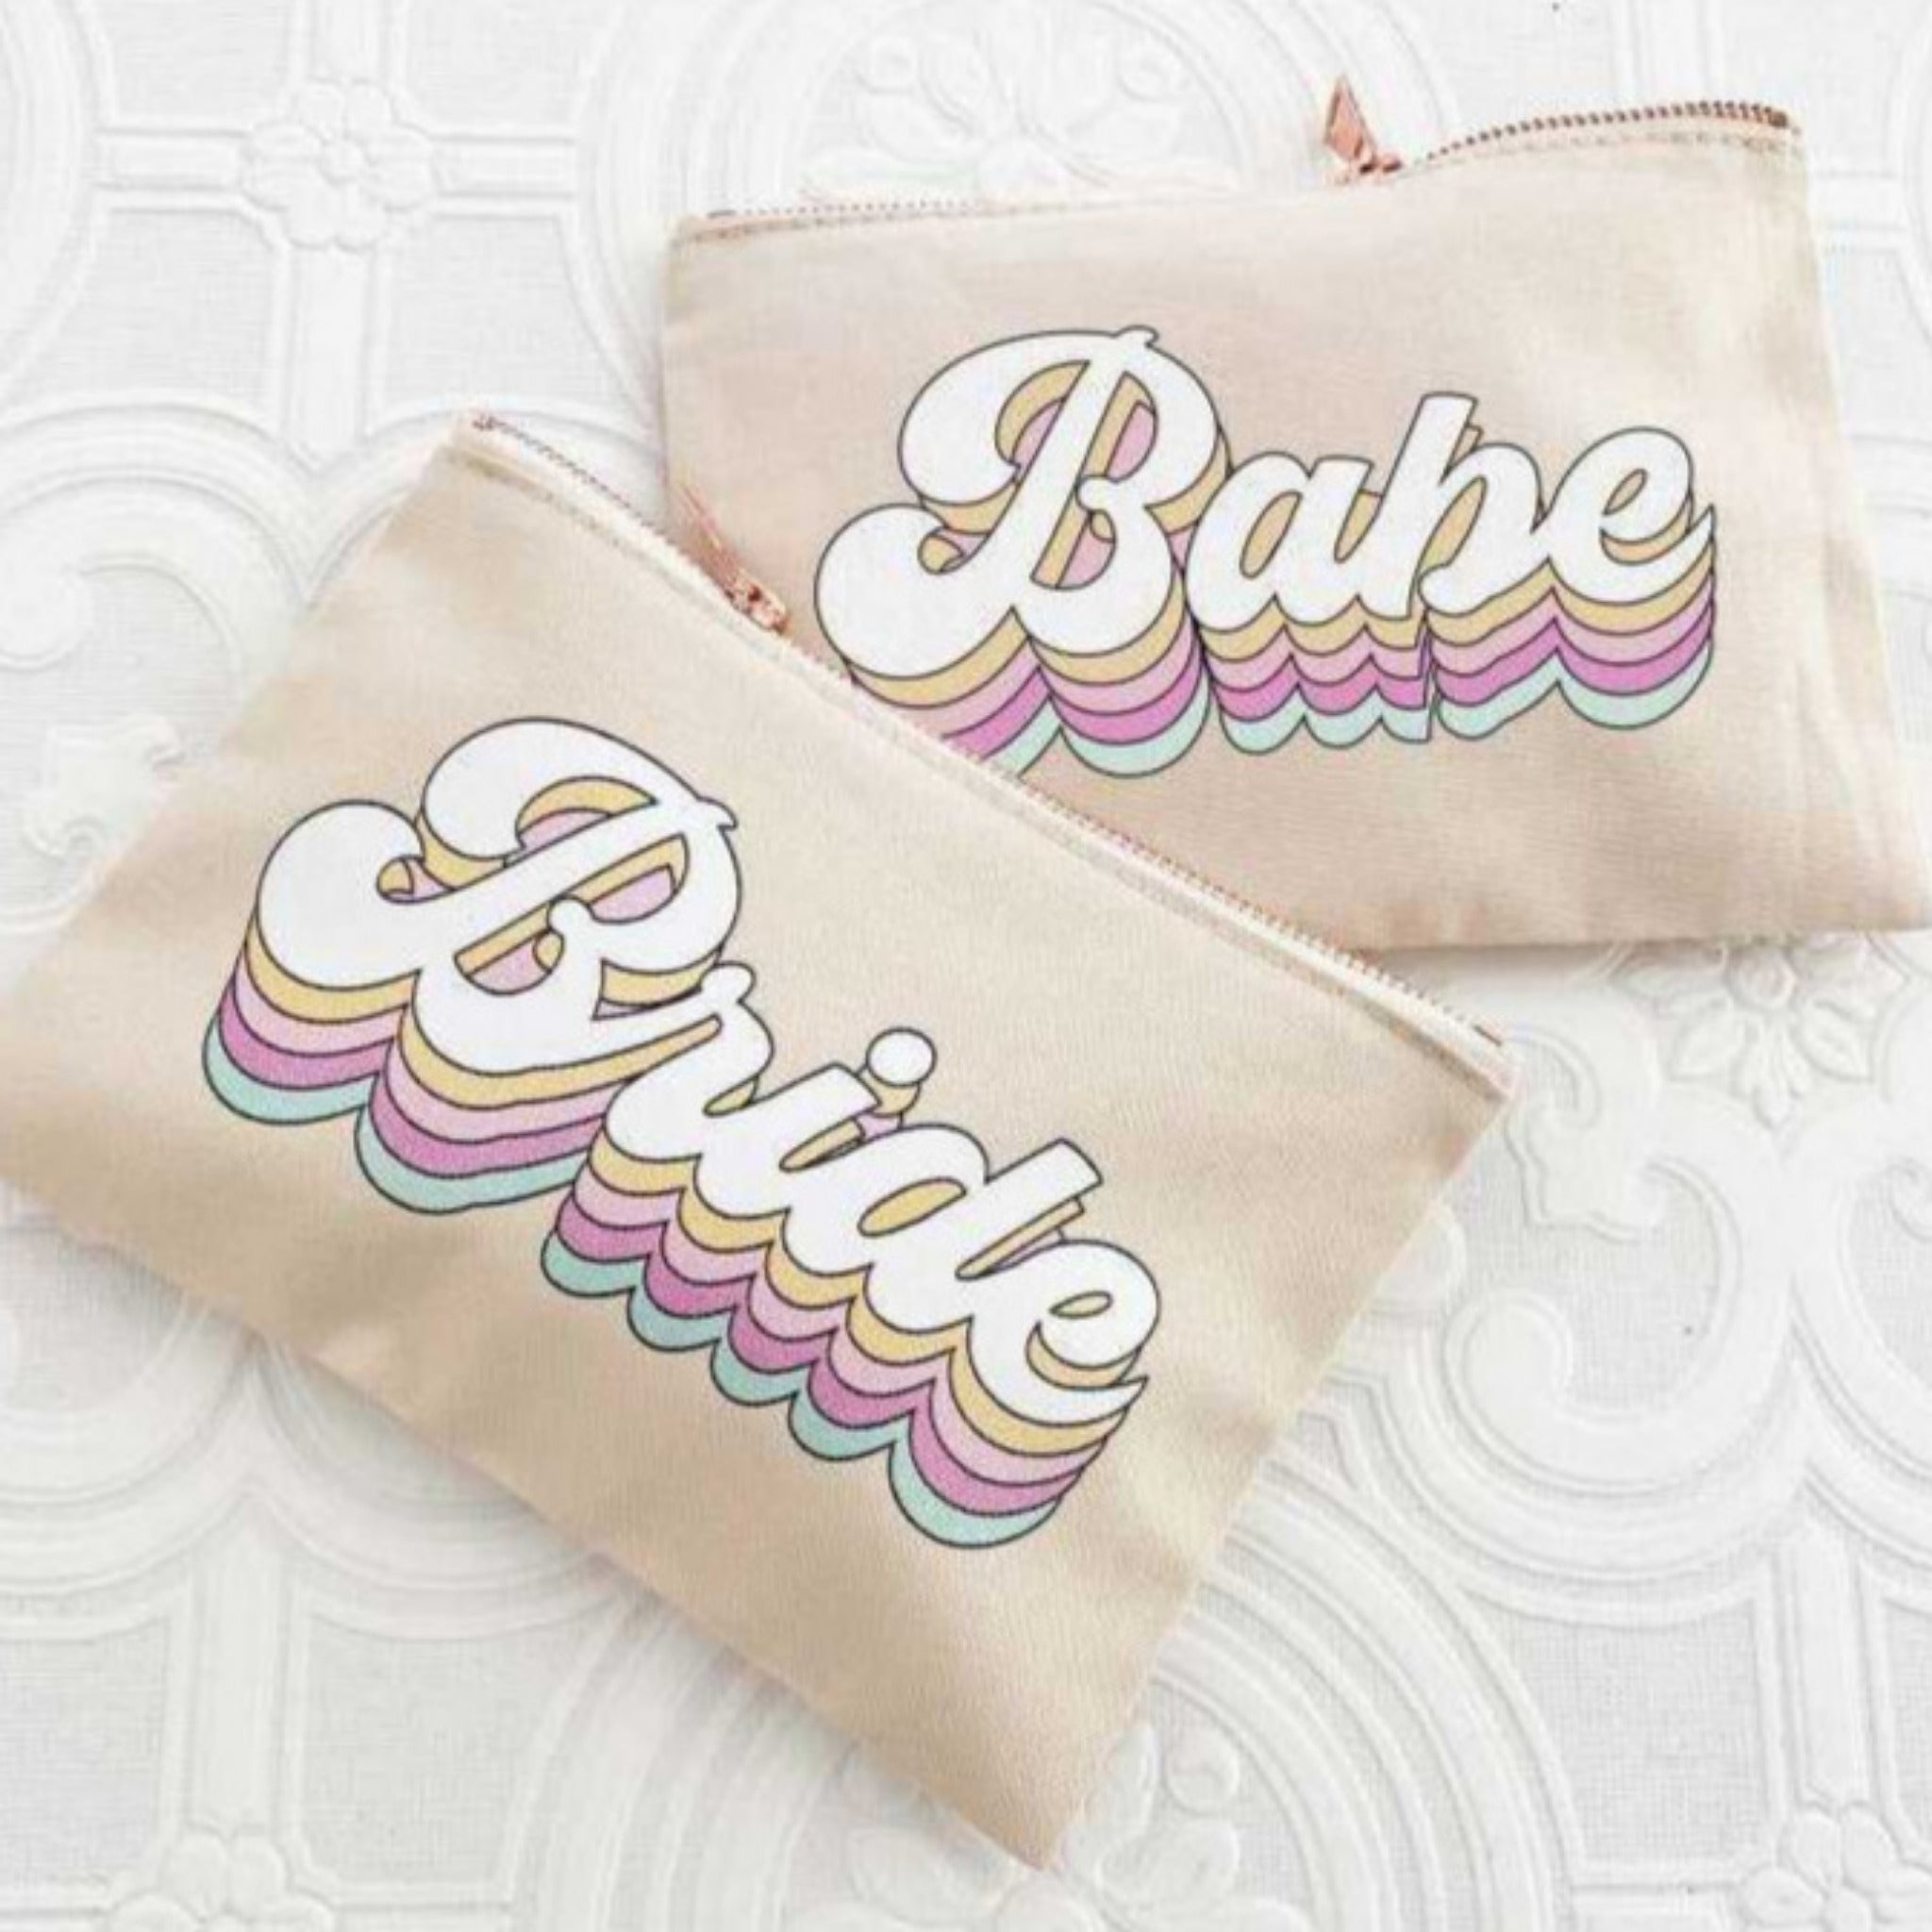 Retro Bridal Party Cosmetic Bags